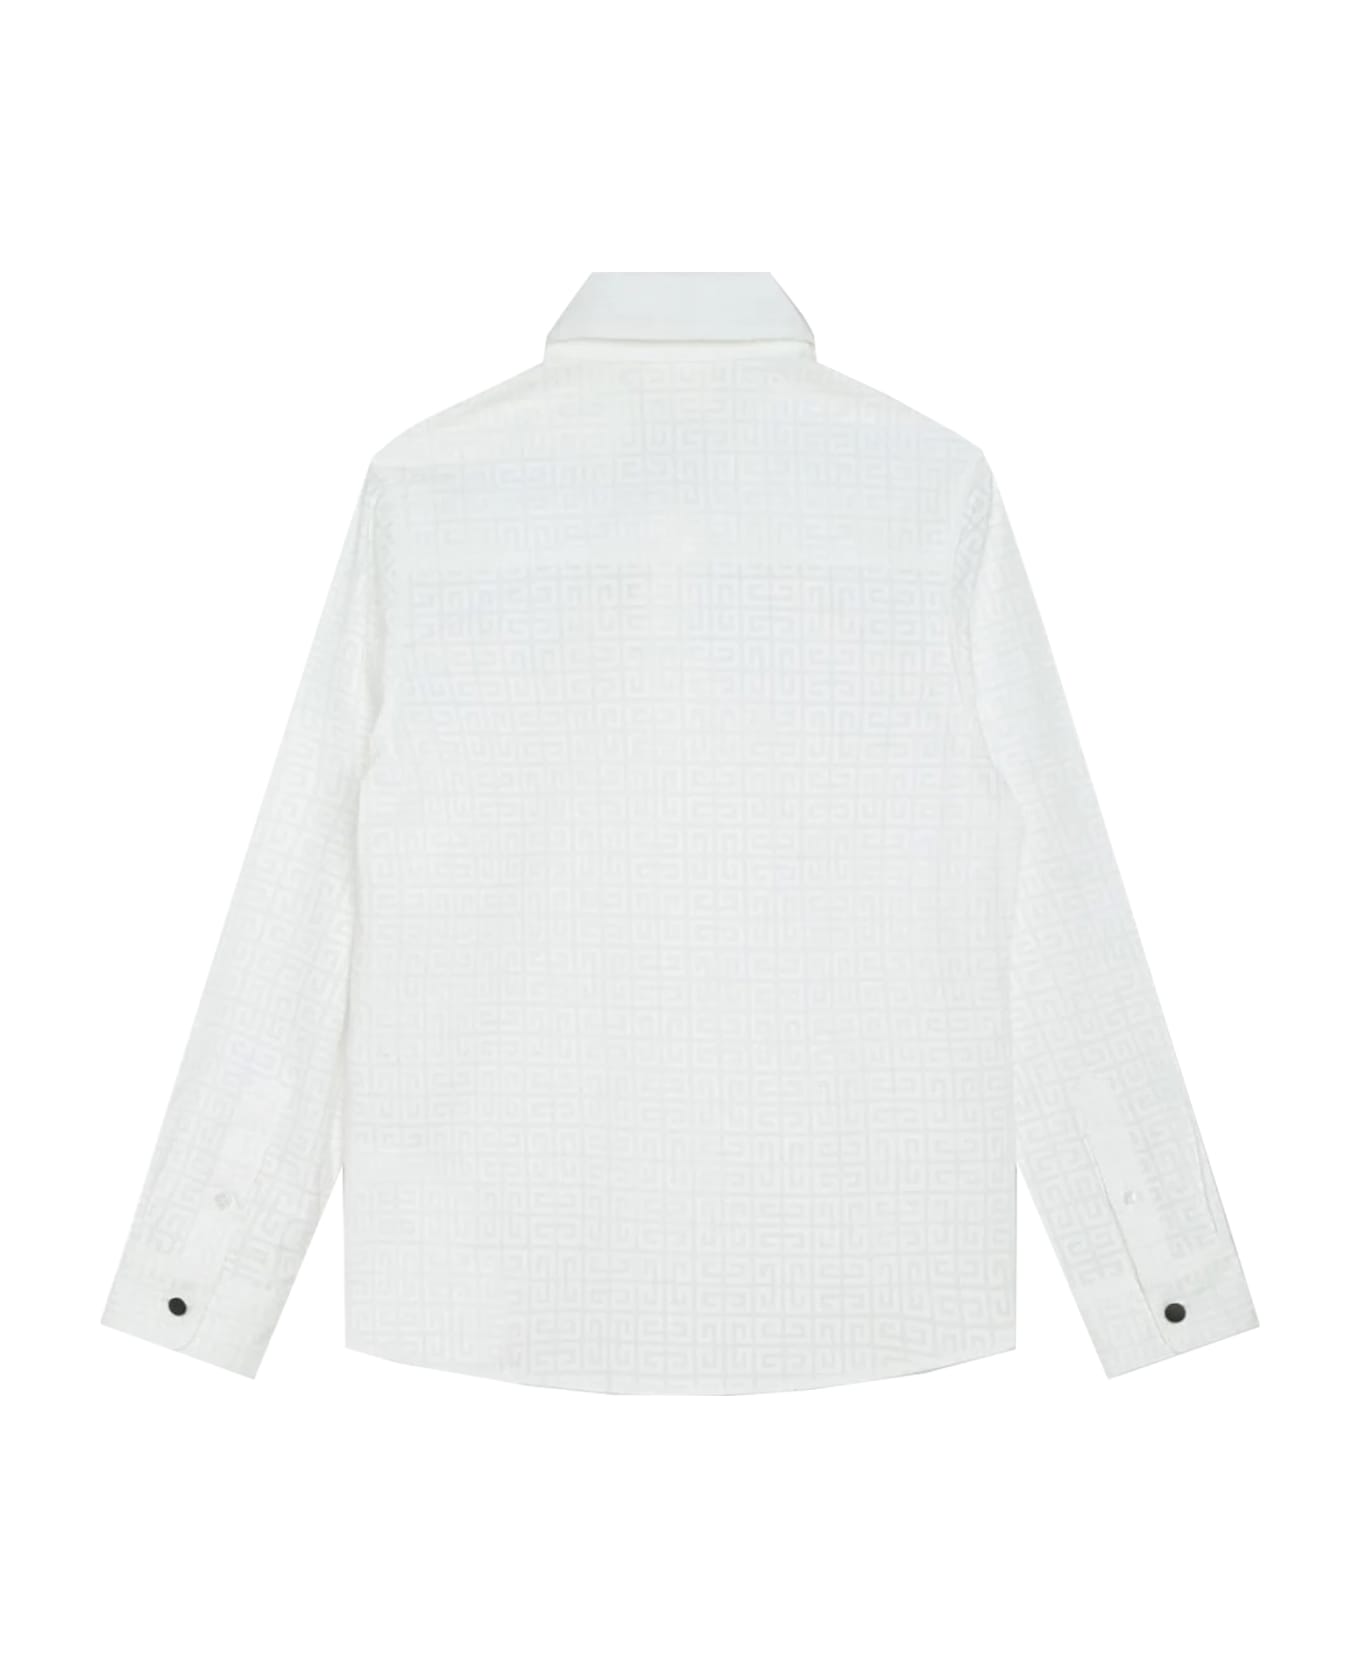 Givenchy top Shirt - White